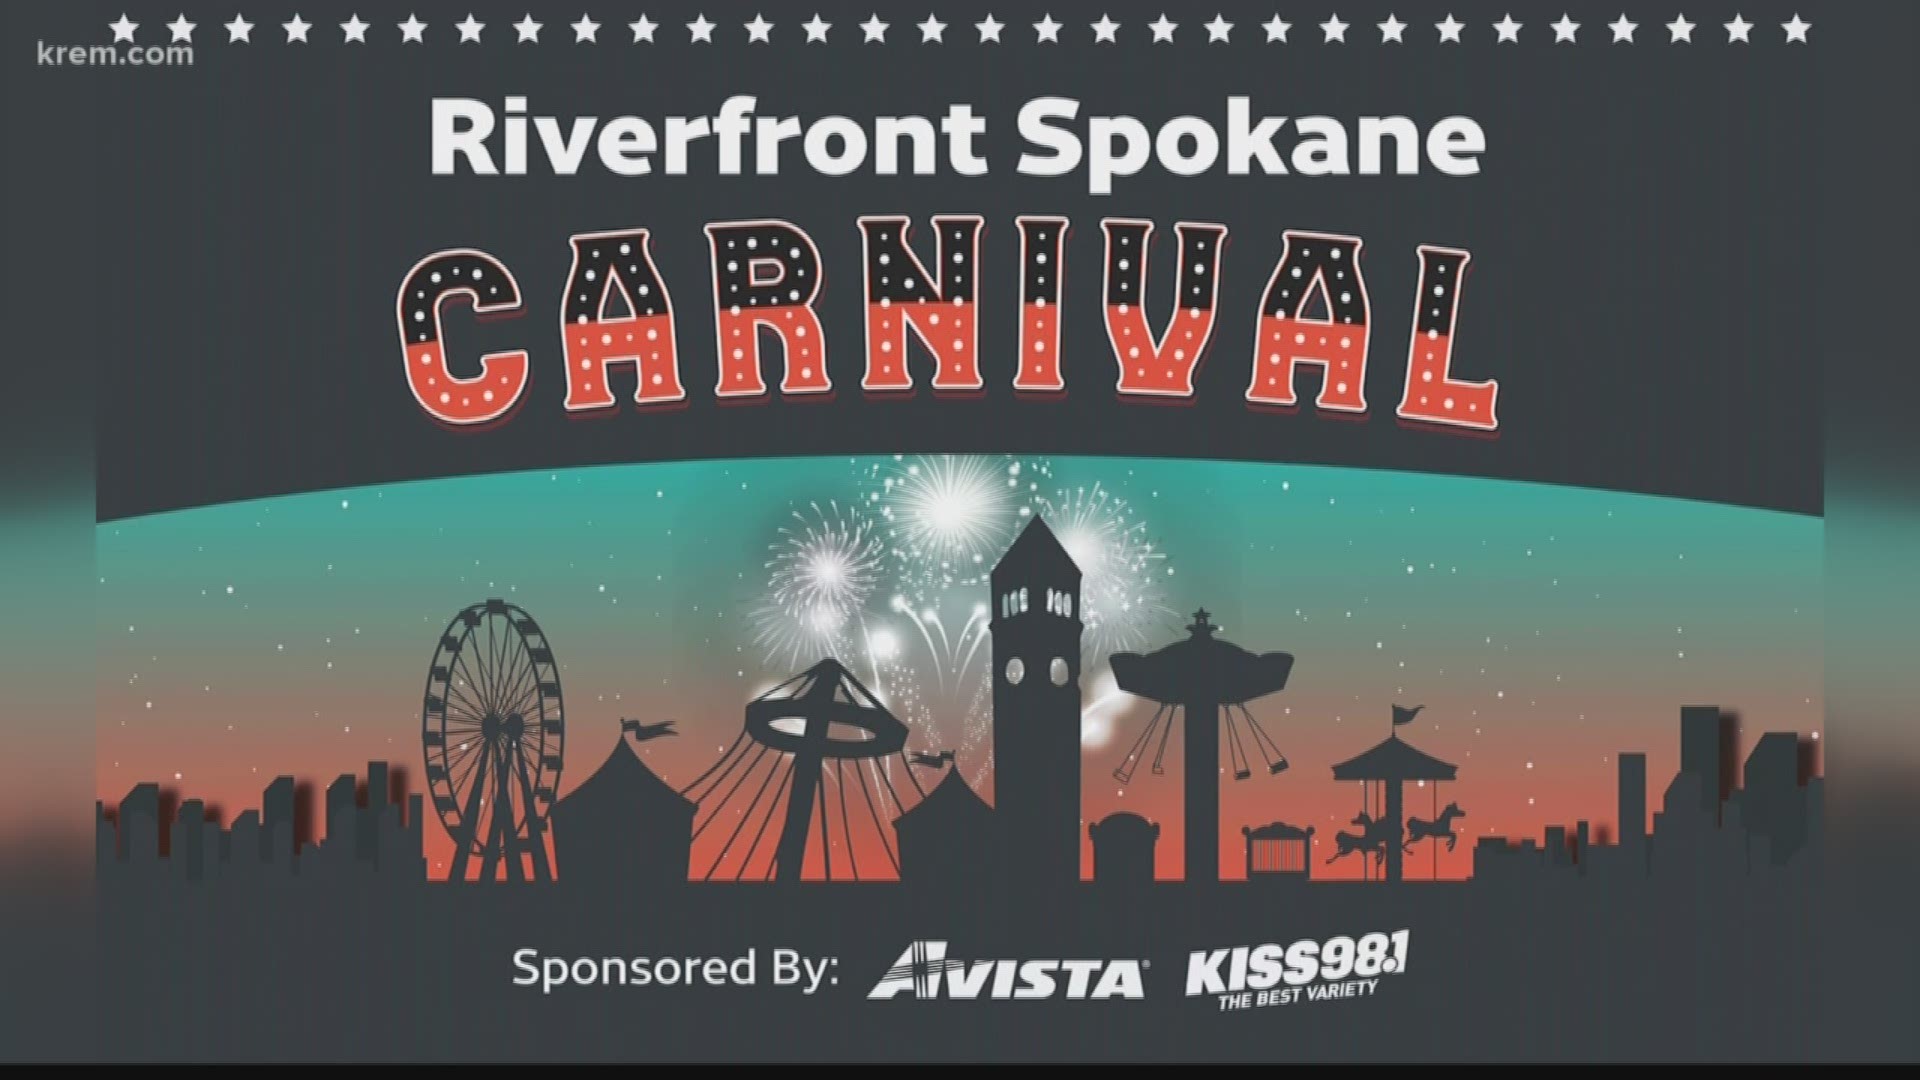 Visit Spokane's Kate Hudson brings you the best events around Spokane for July 4-7, 2019 during Tourist in Your Town.